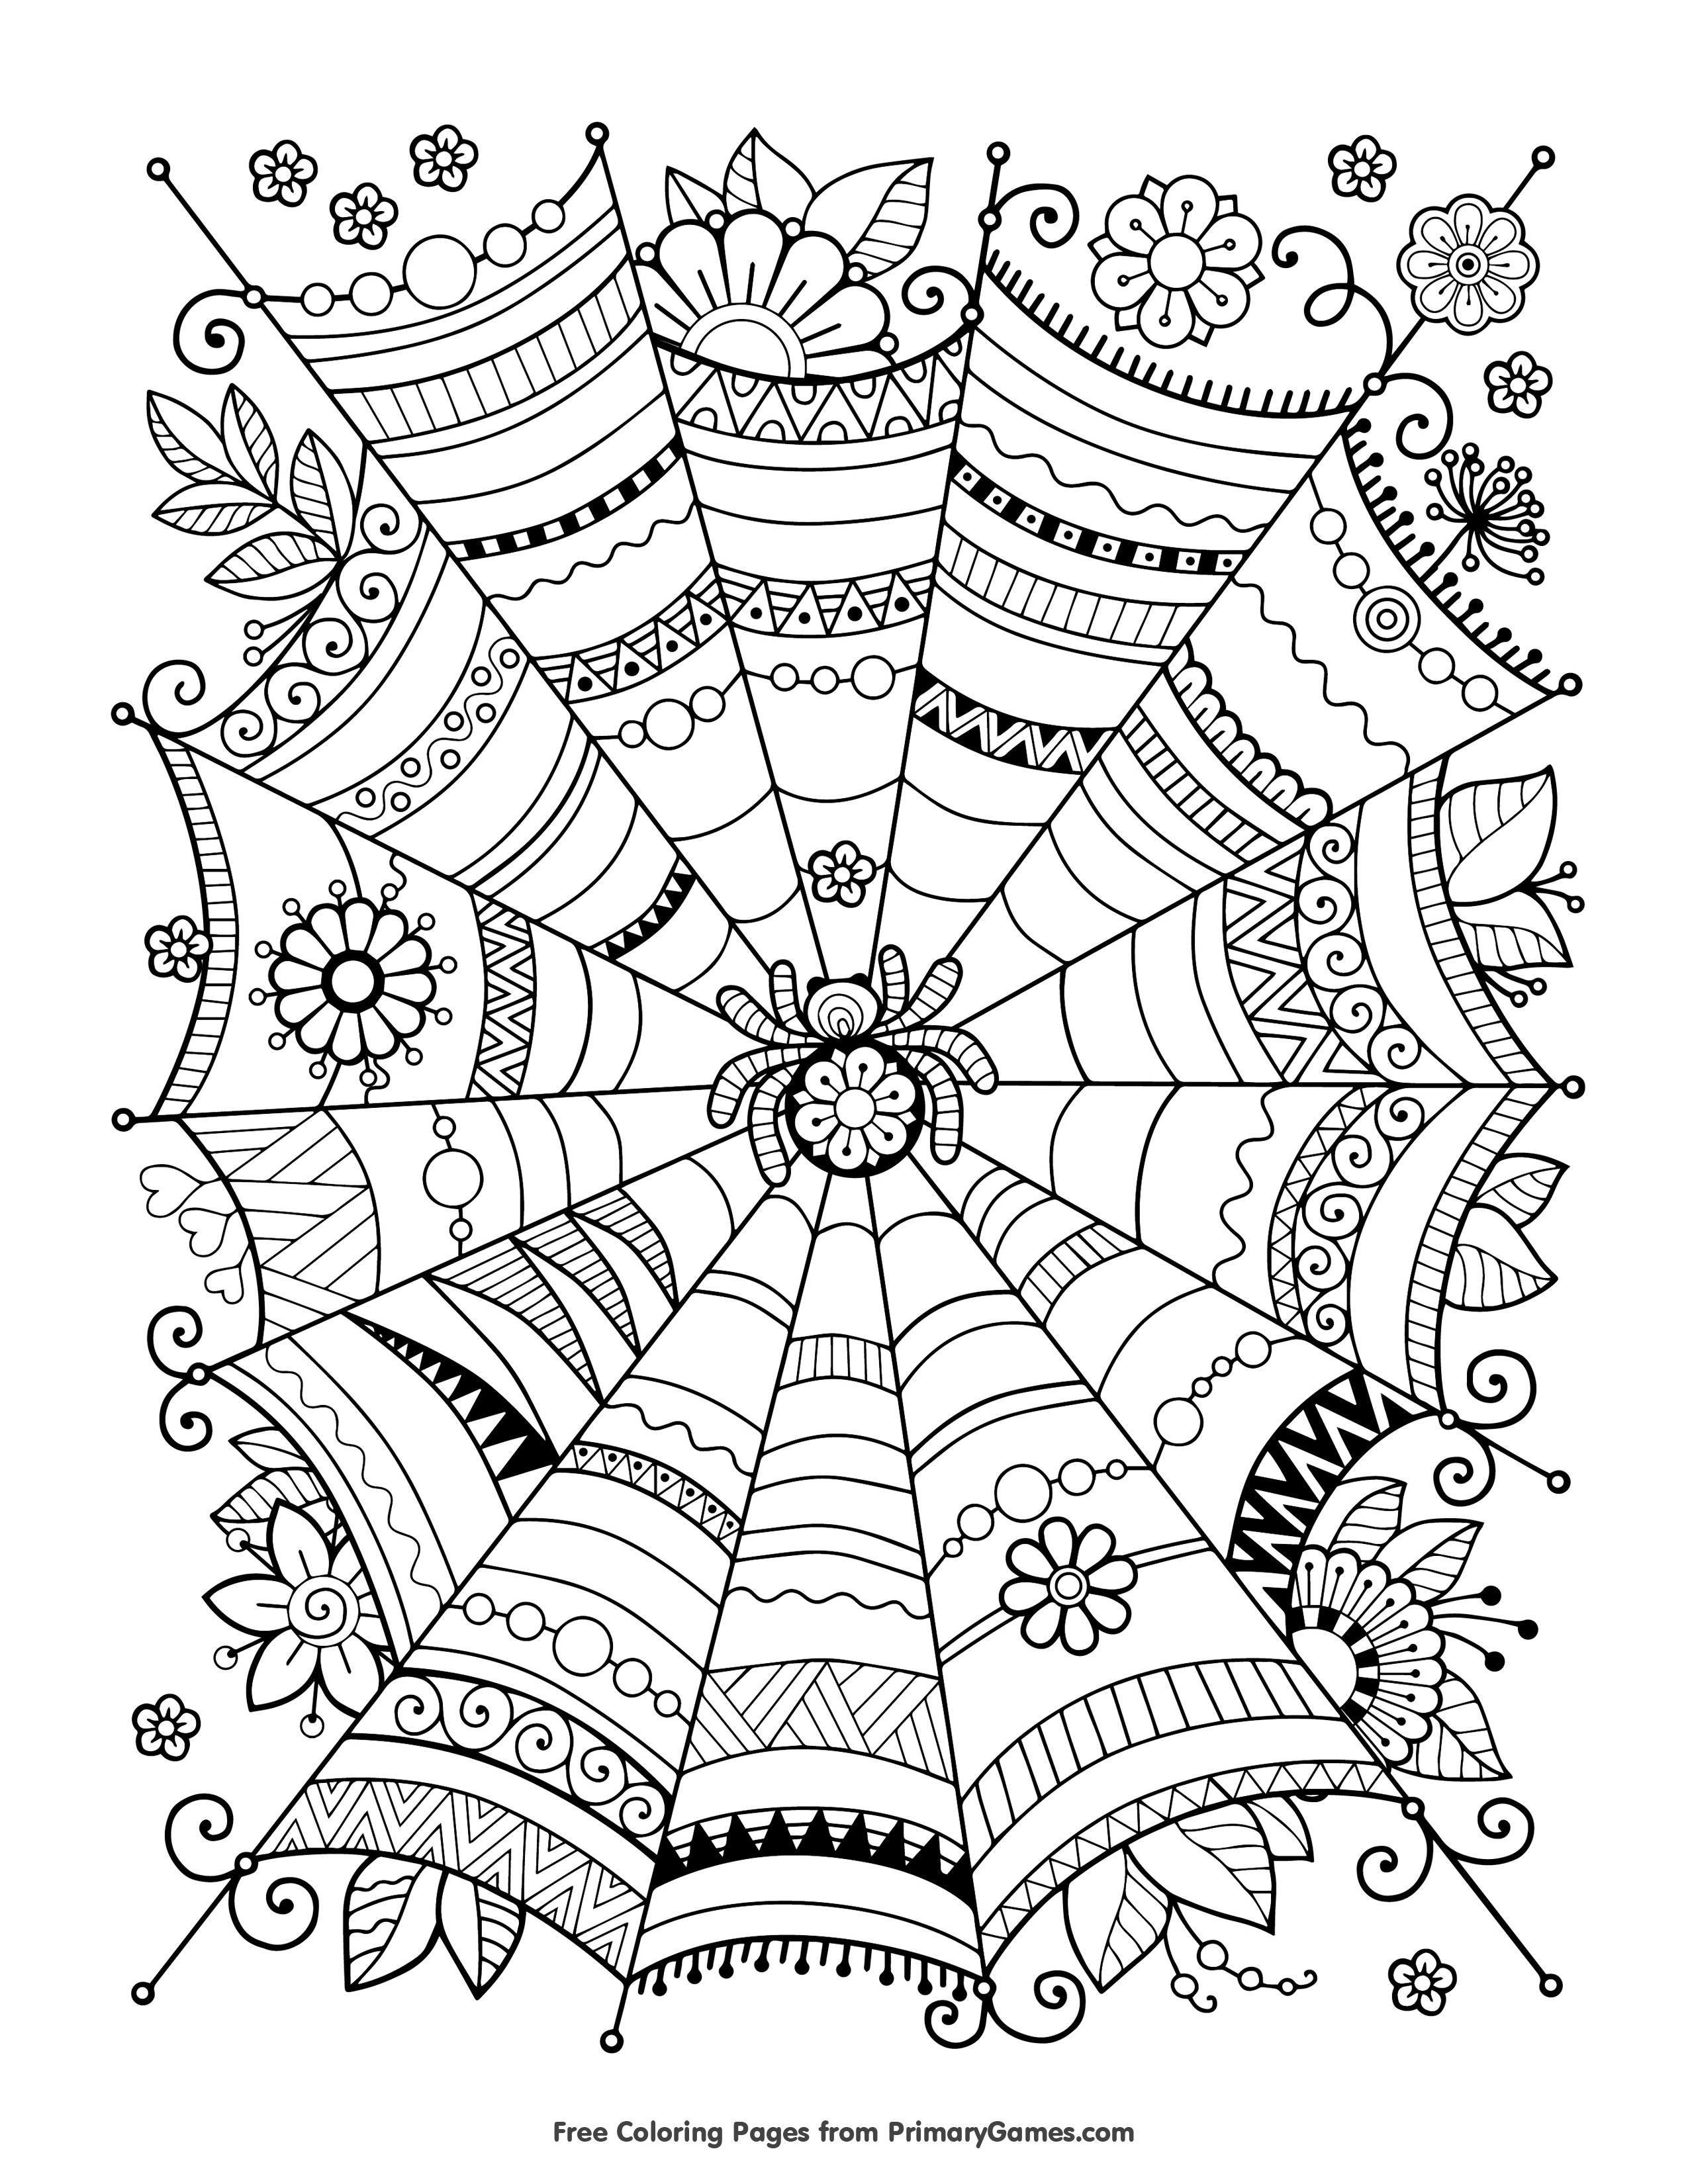 Free Printable Halloween Coloring Pages Adults Archives - Free Printable Halloween Coloring Pages